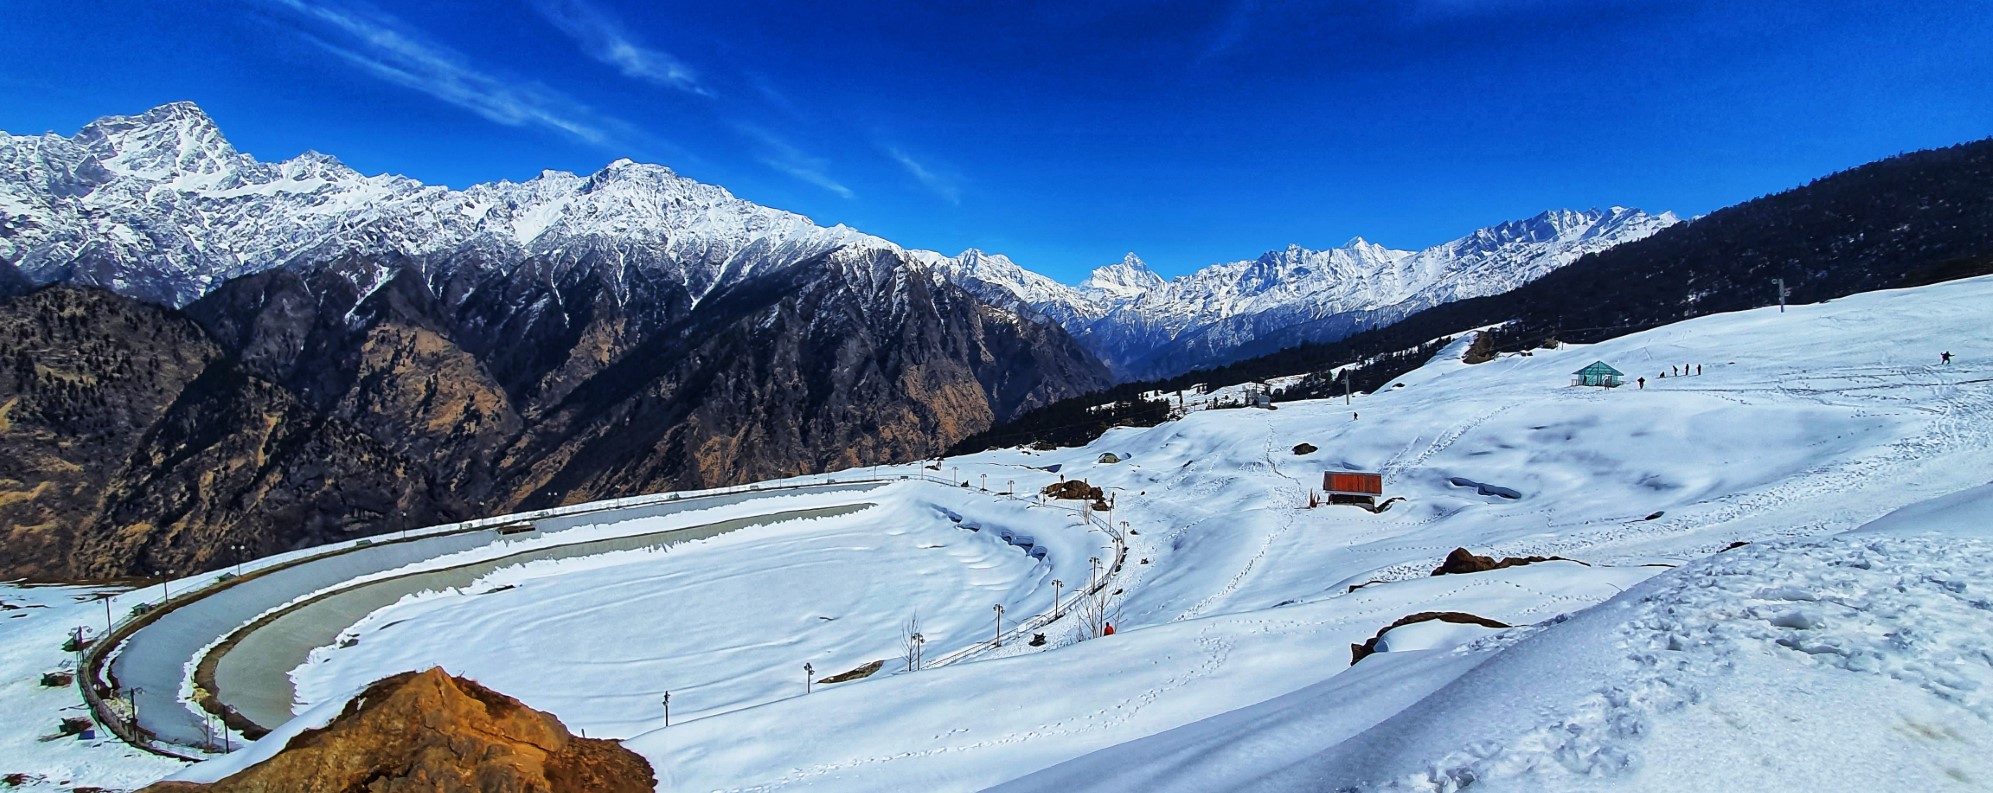 Auli in May